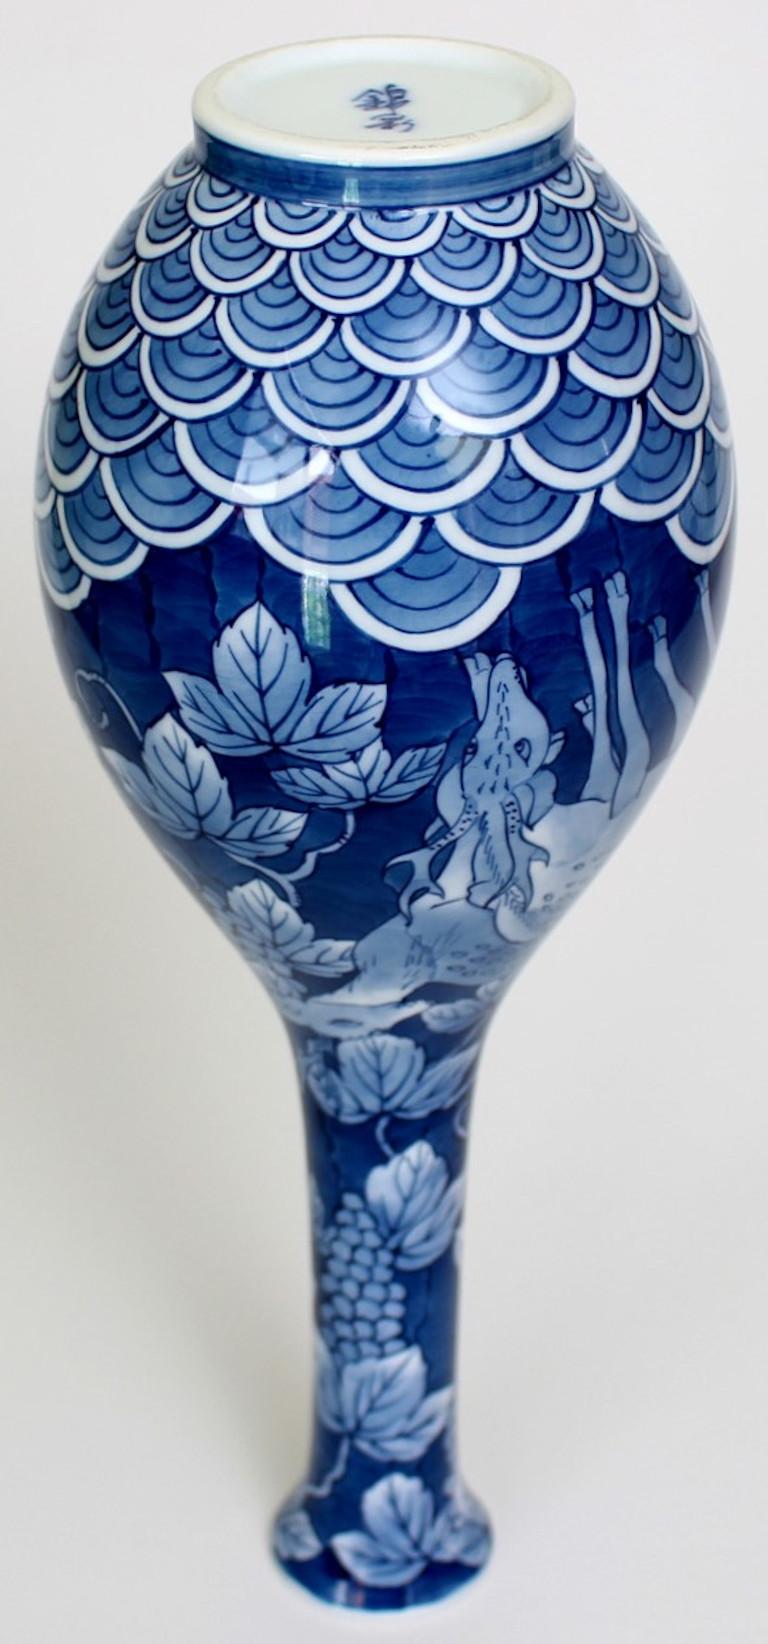 Contemporary Blue Japanese Hand-Painted Porcelain Vase by Master Artist